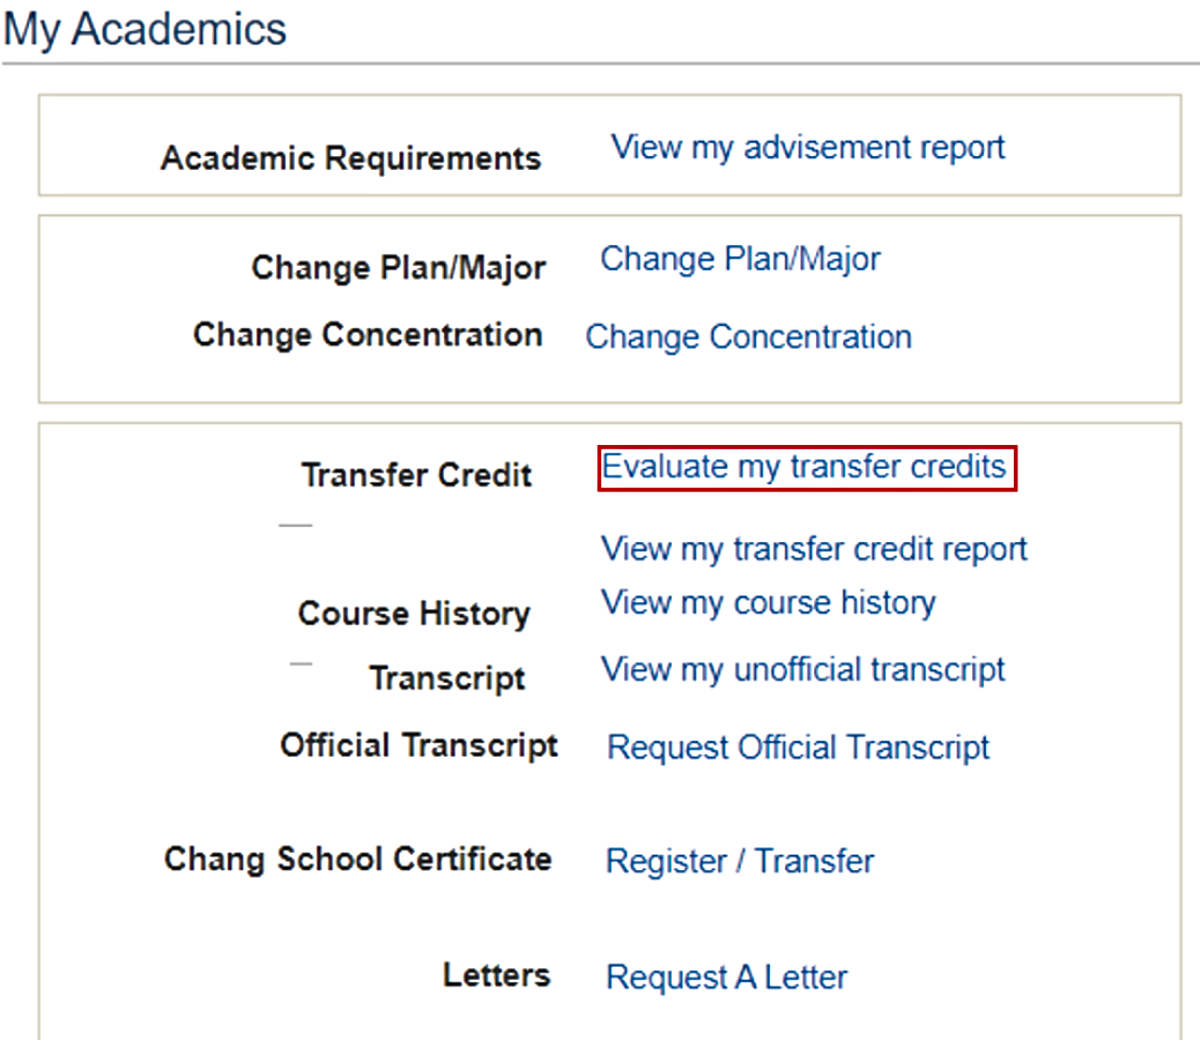 'Evaluate my transfer credits' link in My Academics section of RAMSS